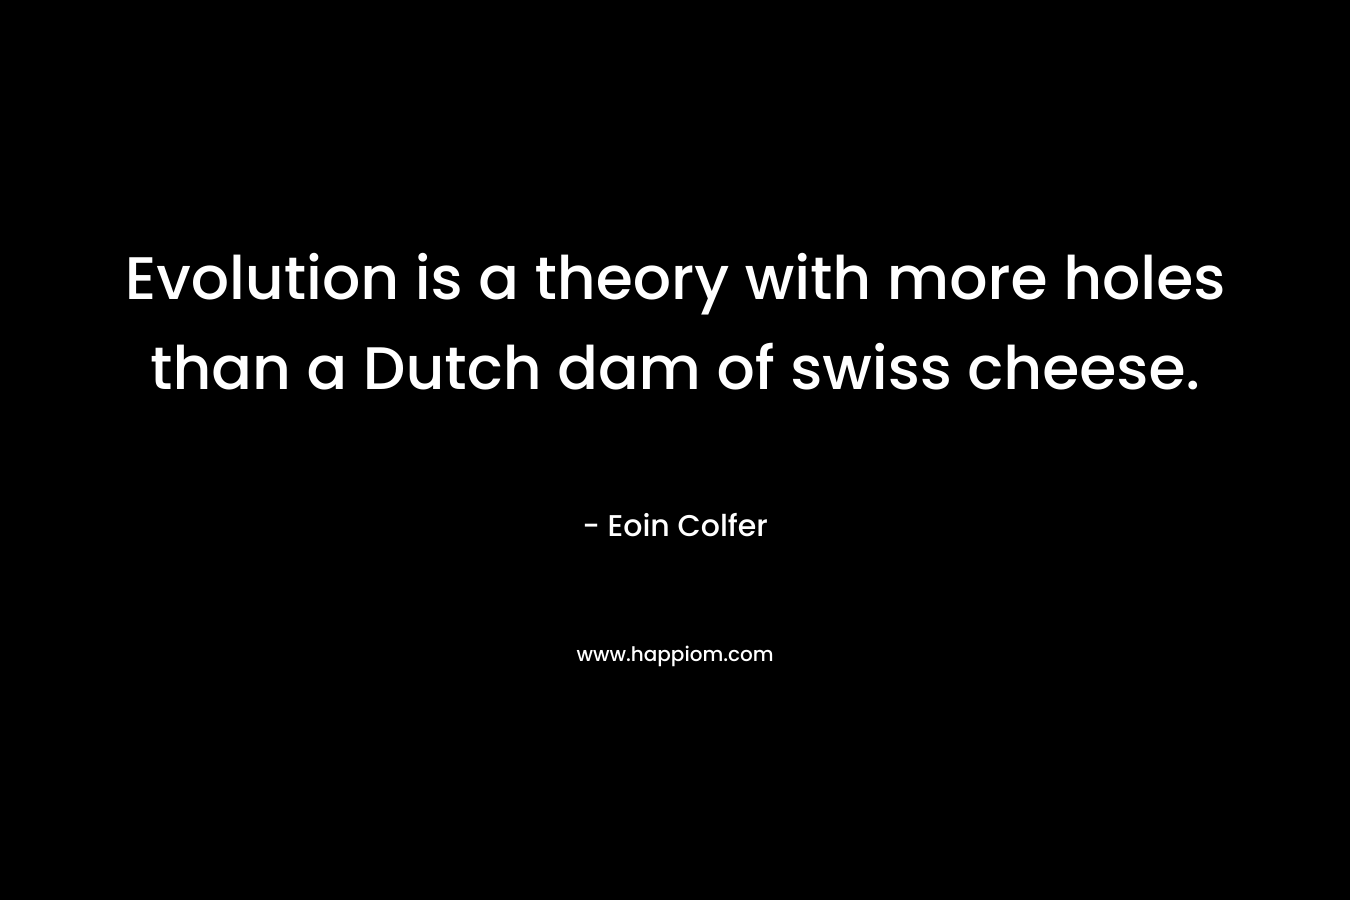 Evolution is a theory with more holes than a Dutch dam of swiss cheese. – Eoin Colfer